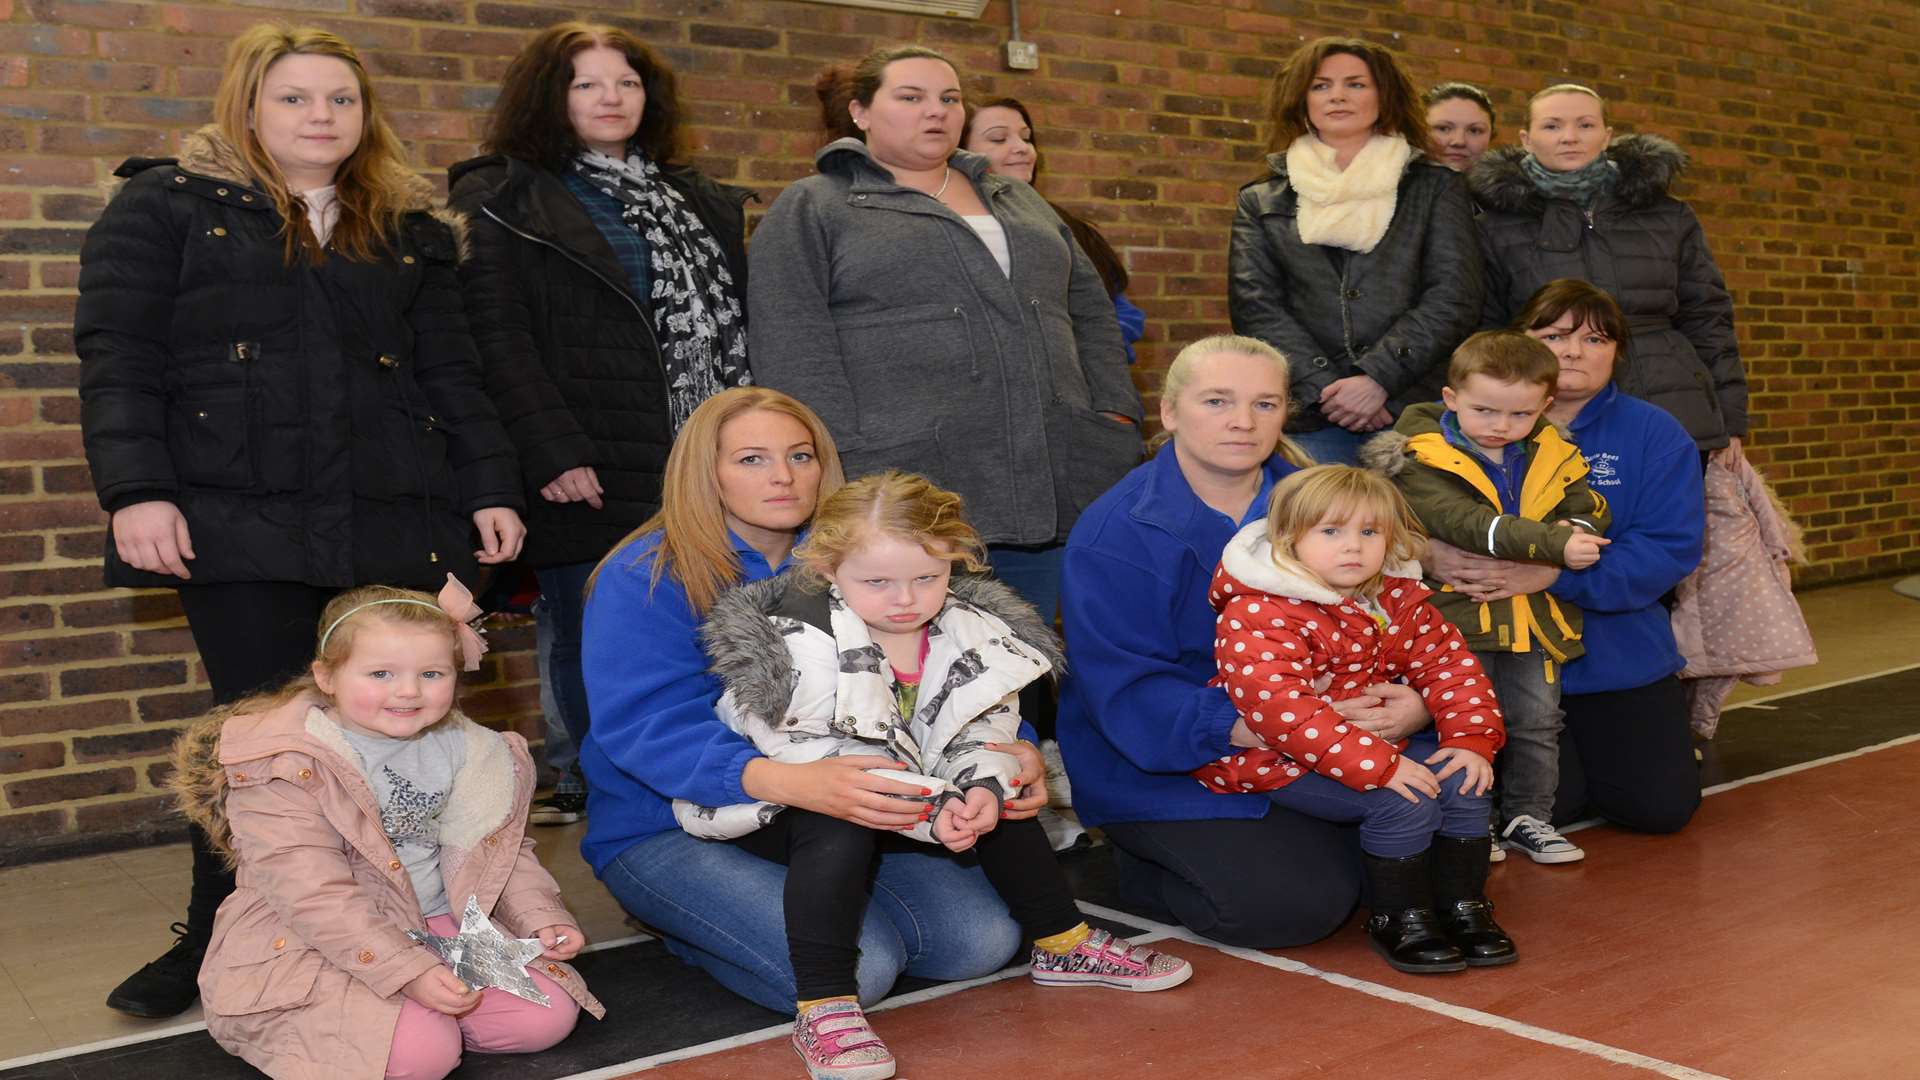 Lisa Marchant with staff and some of the mum's and children at Busy Bees Nursery school.